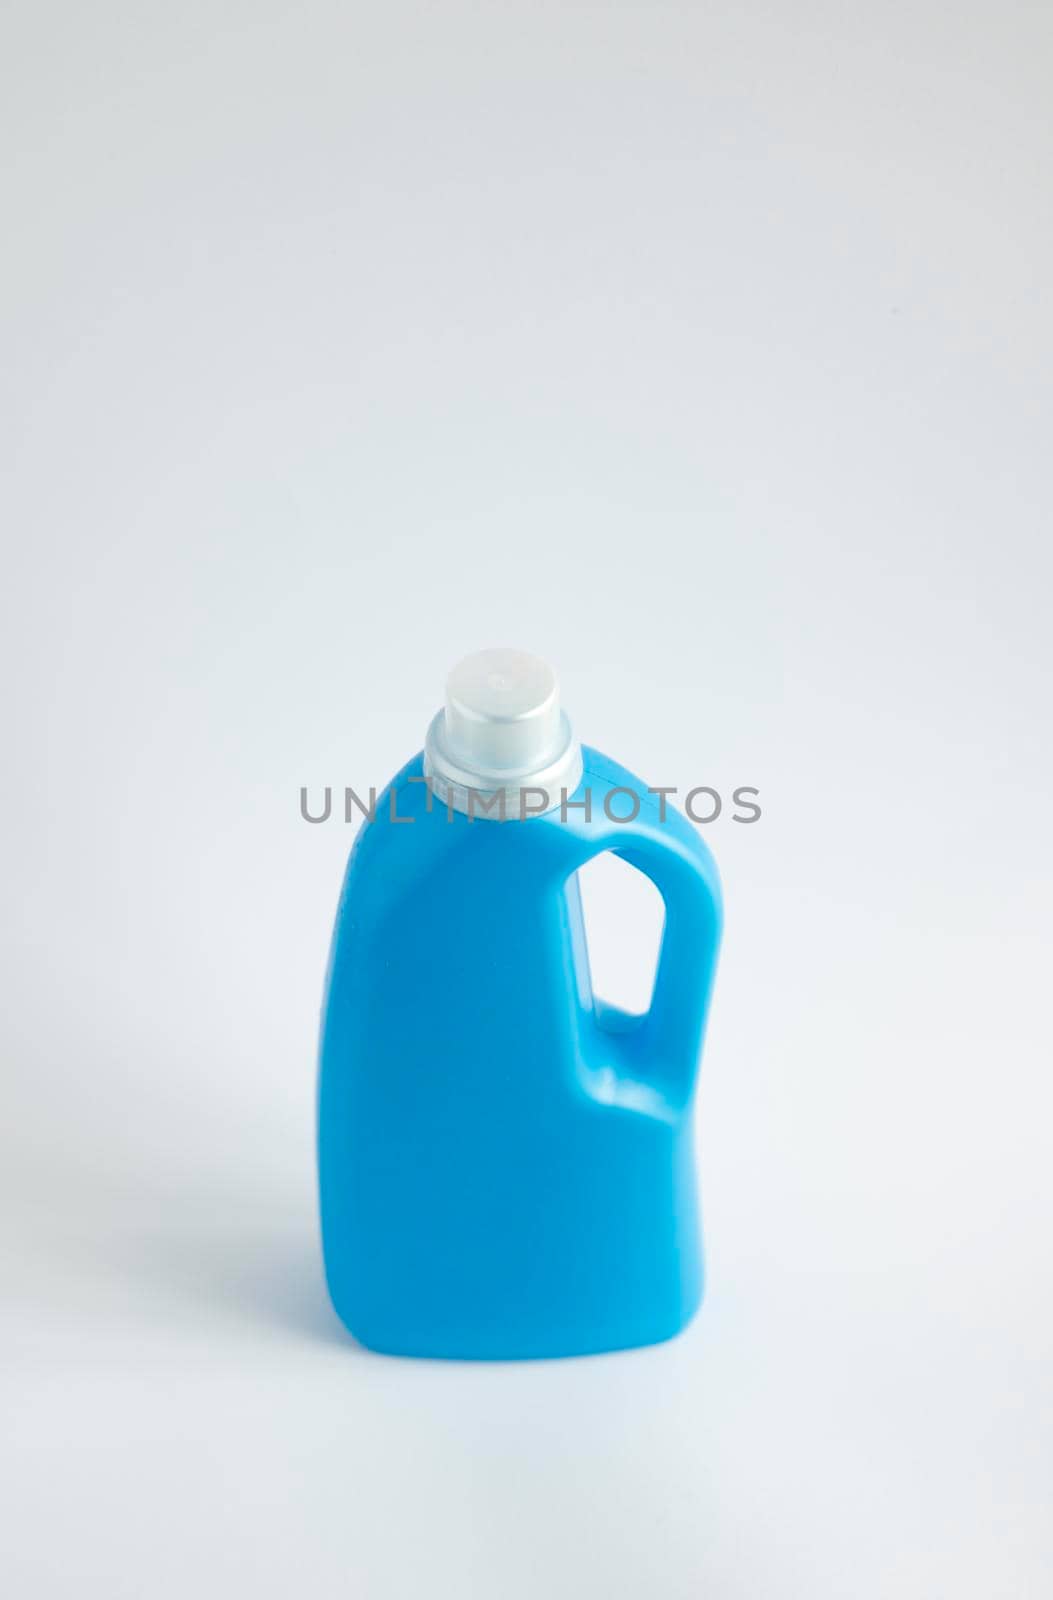 Blue plastic liquid detergent bottle isolated on white background. Laundry container, merchandise template. Product design. Mock up